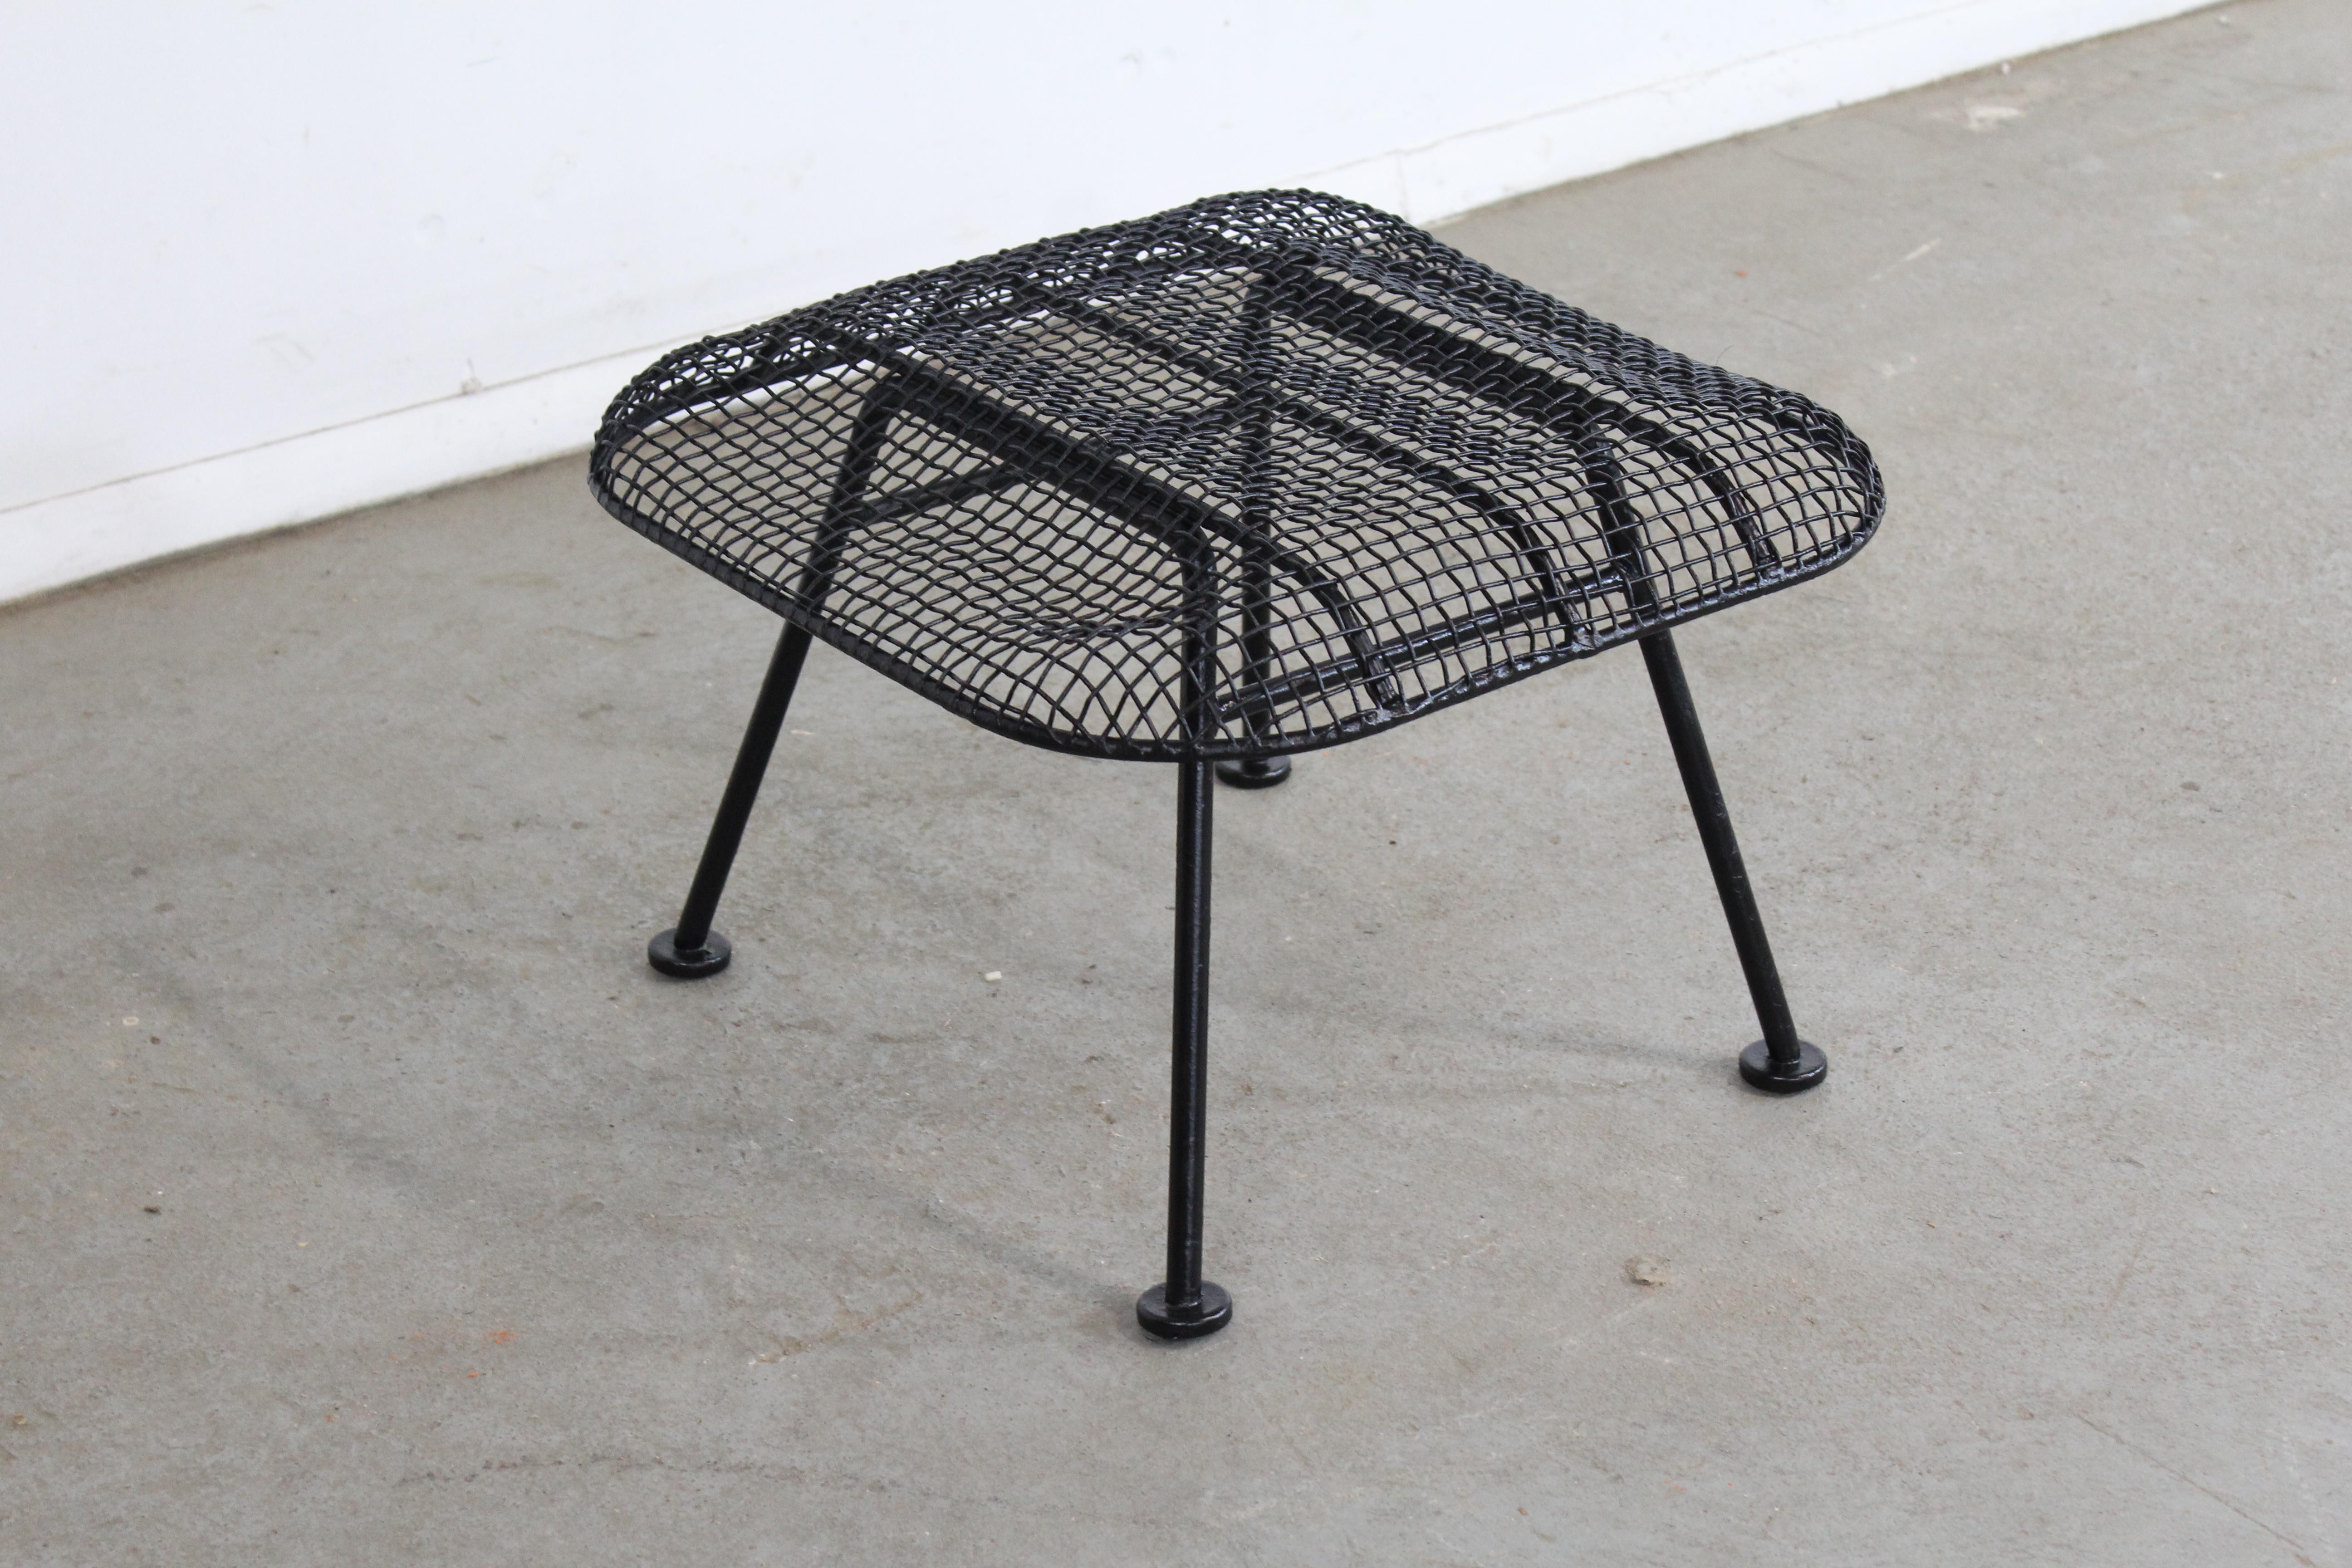 Mid-Century Modern Russell Woodard sculptura outdoor wrought iron ottoman/stool

Offered is a vintage outdoor ottoman by Russell Woodard 'Sculptura'. It has a wrought-iron frame with a low-slung woven mesh steel seat made to withstand all weather